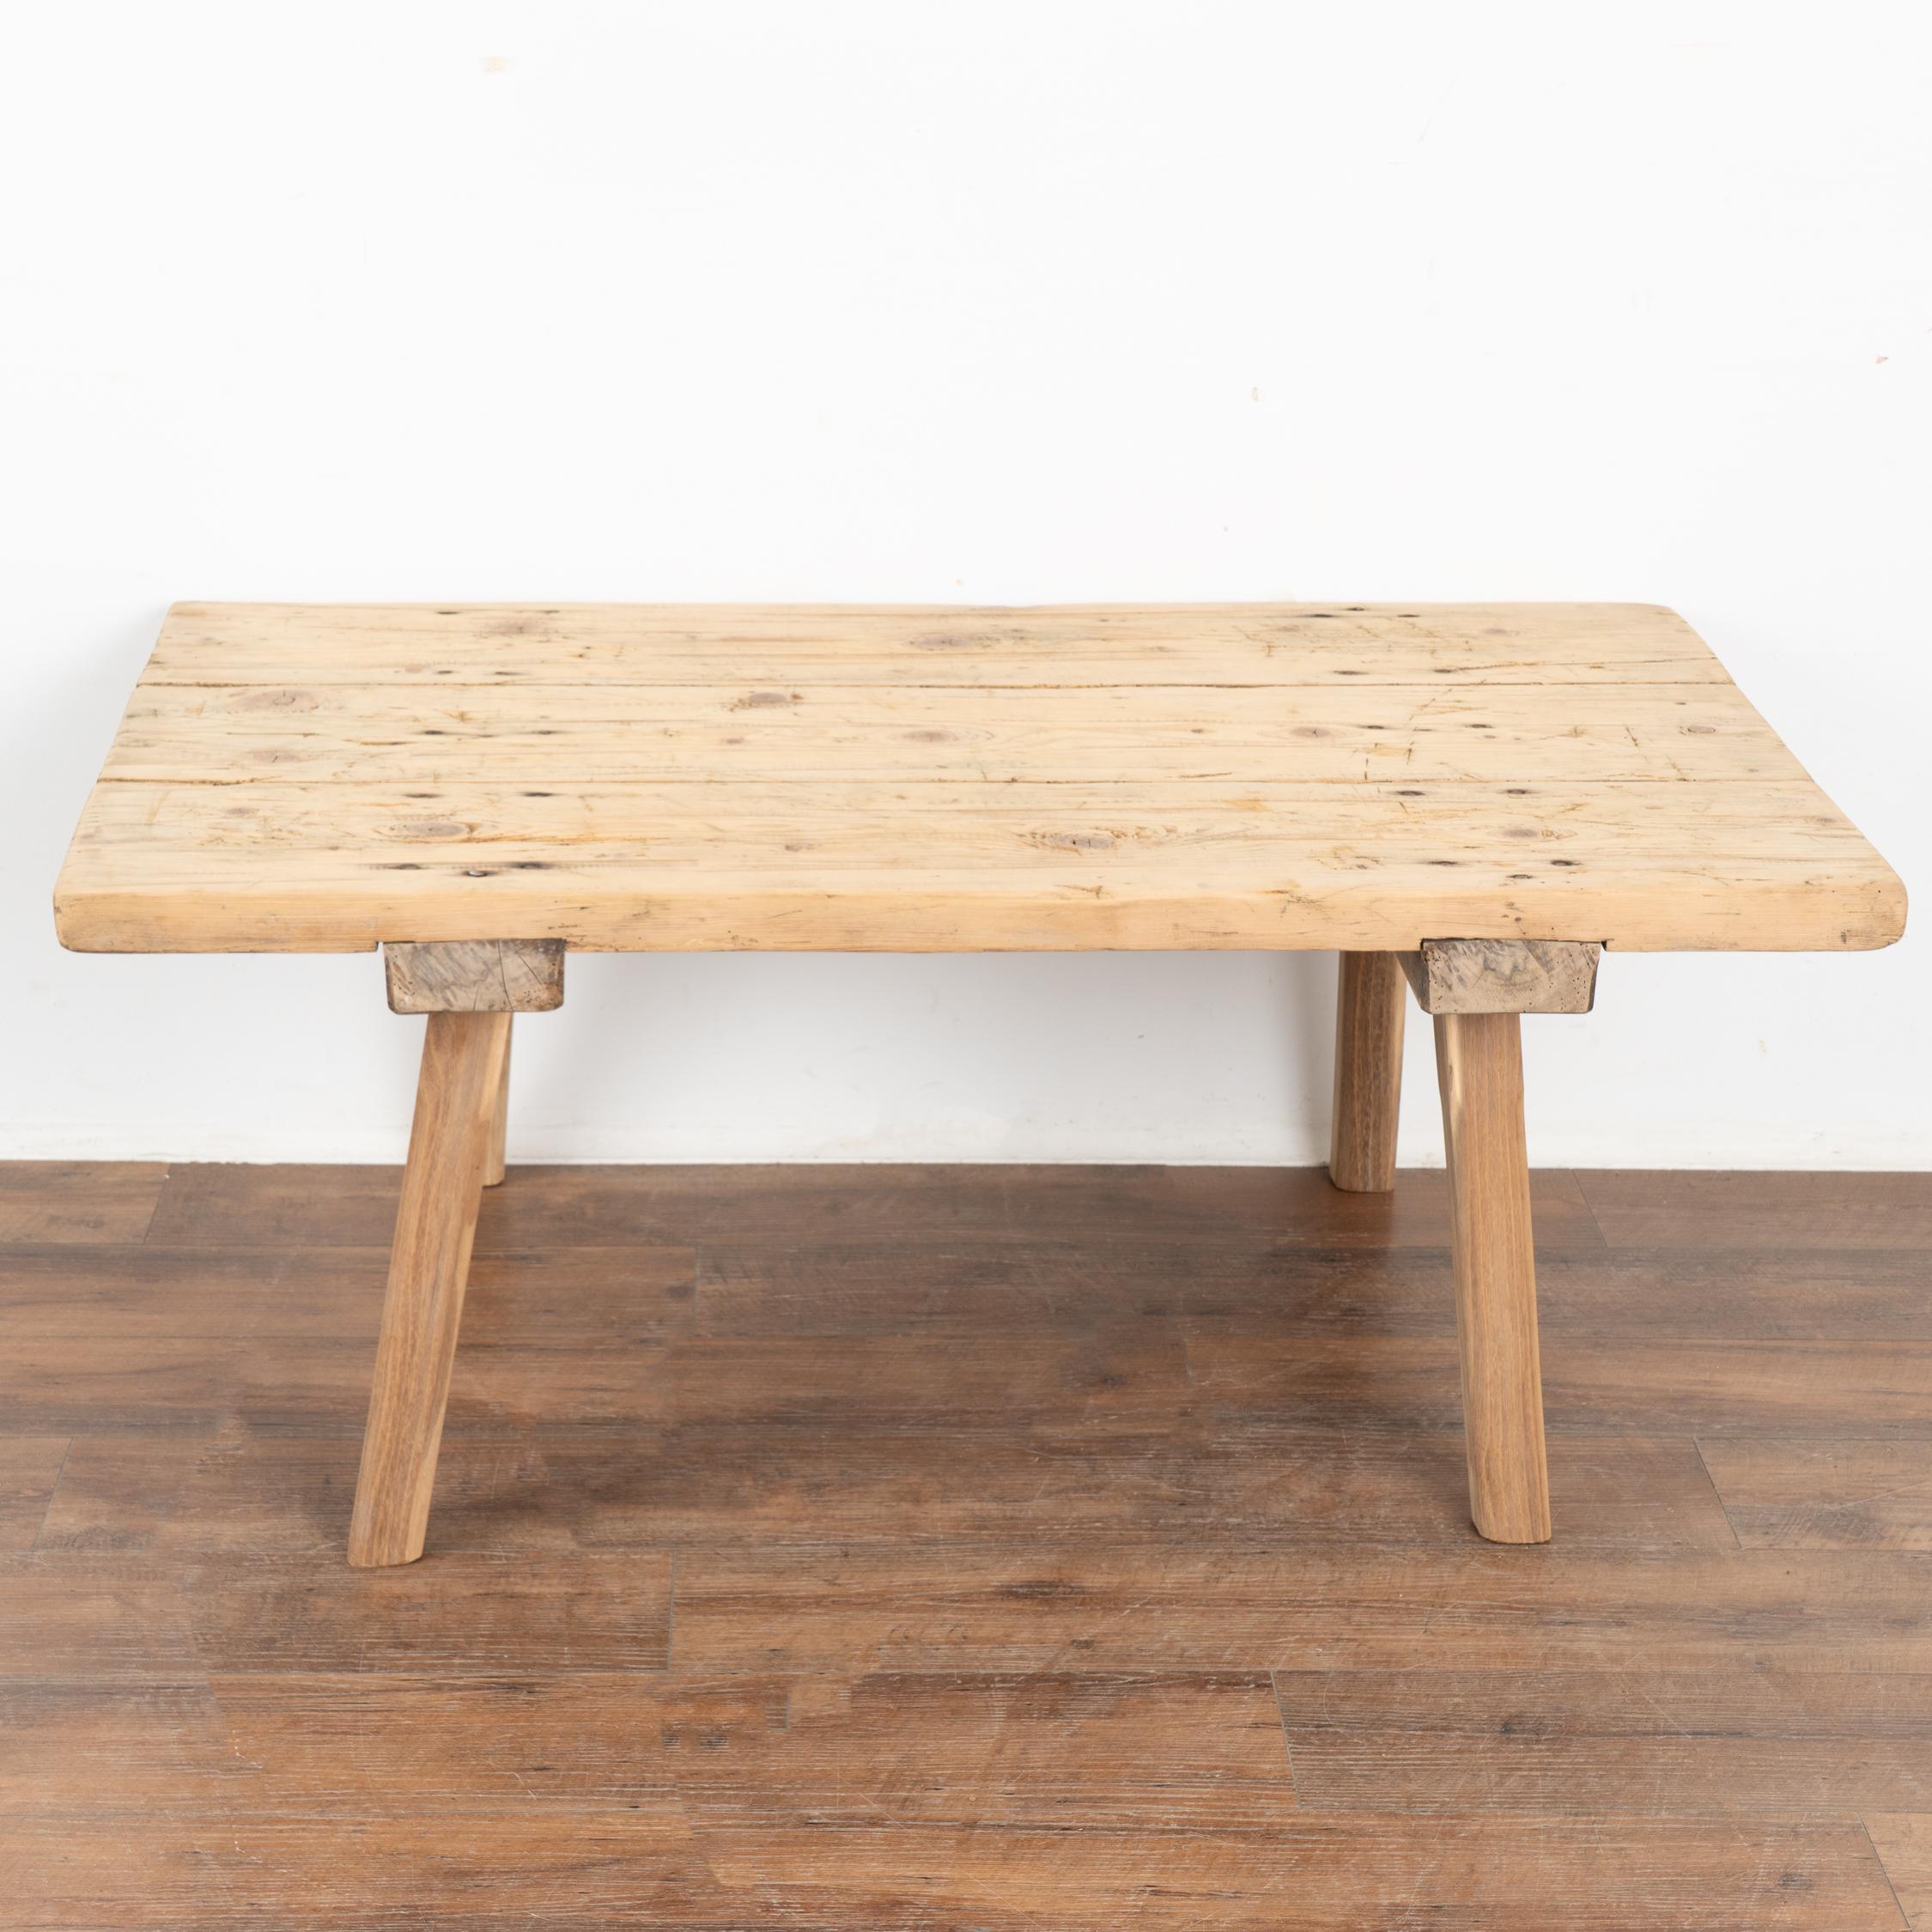 Hungarian Rustic Plank Wood Coffee Table from Hungary circa 1900's For Sale